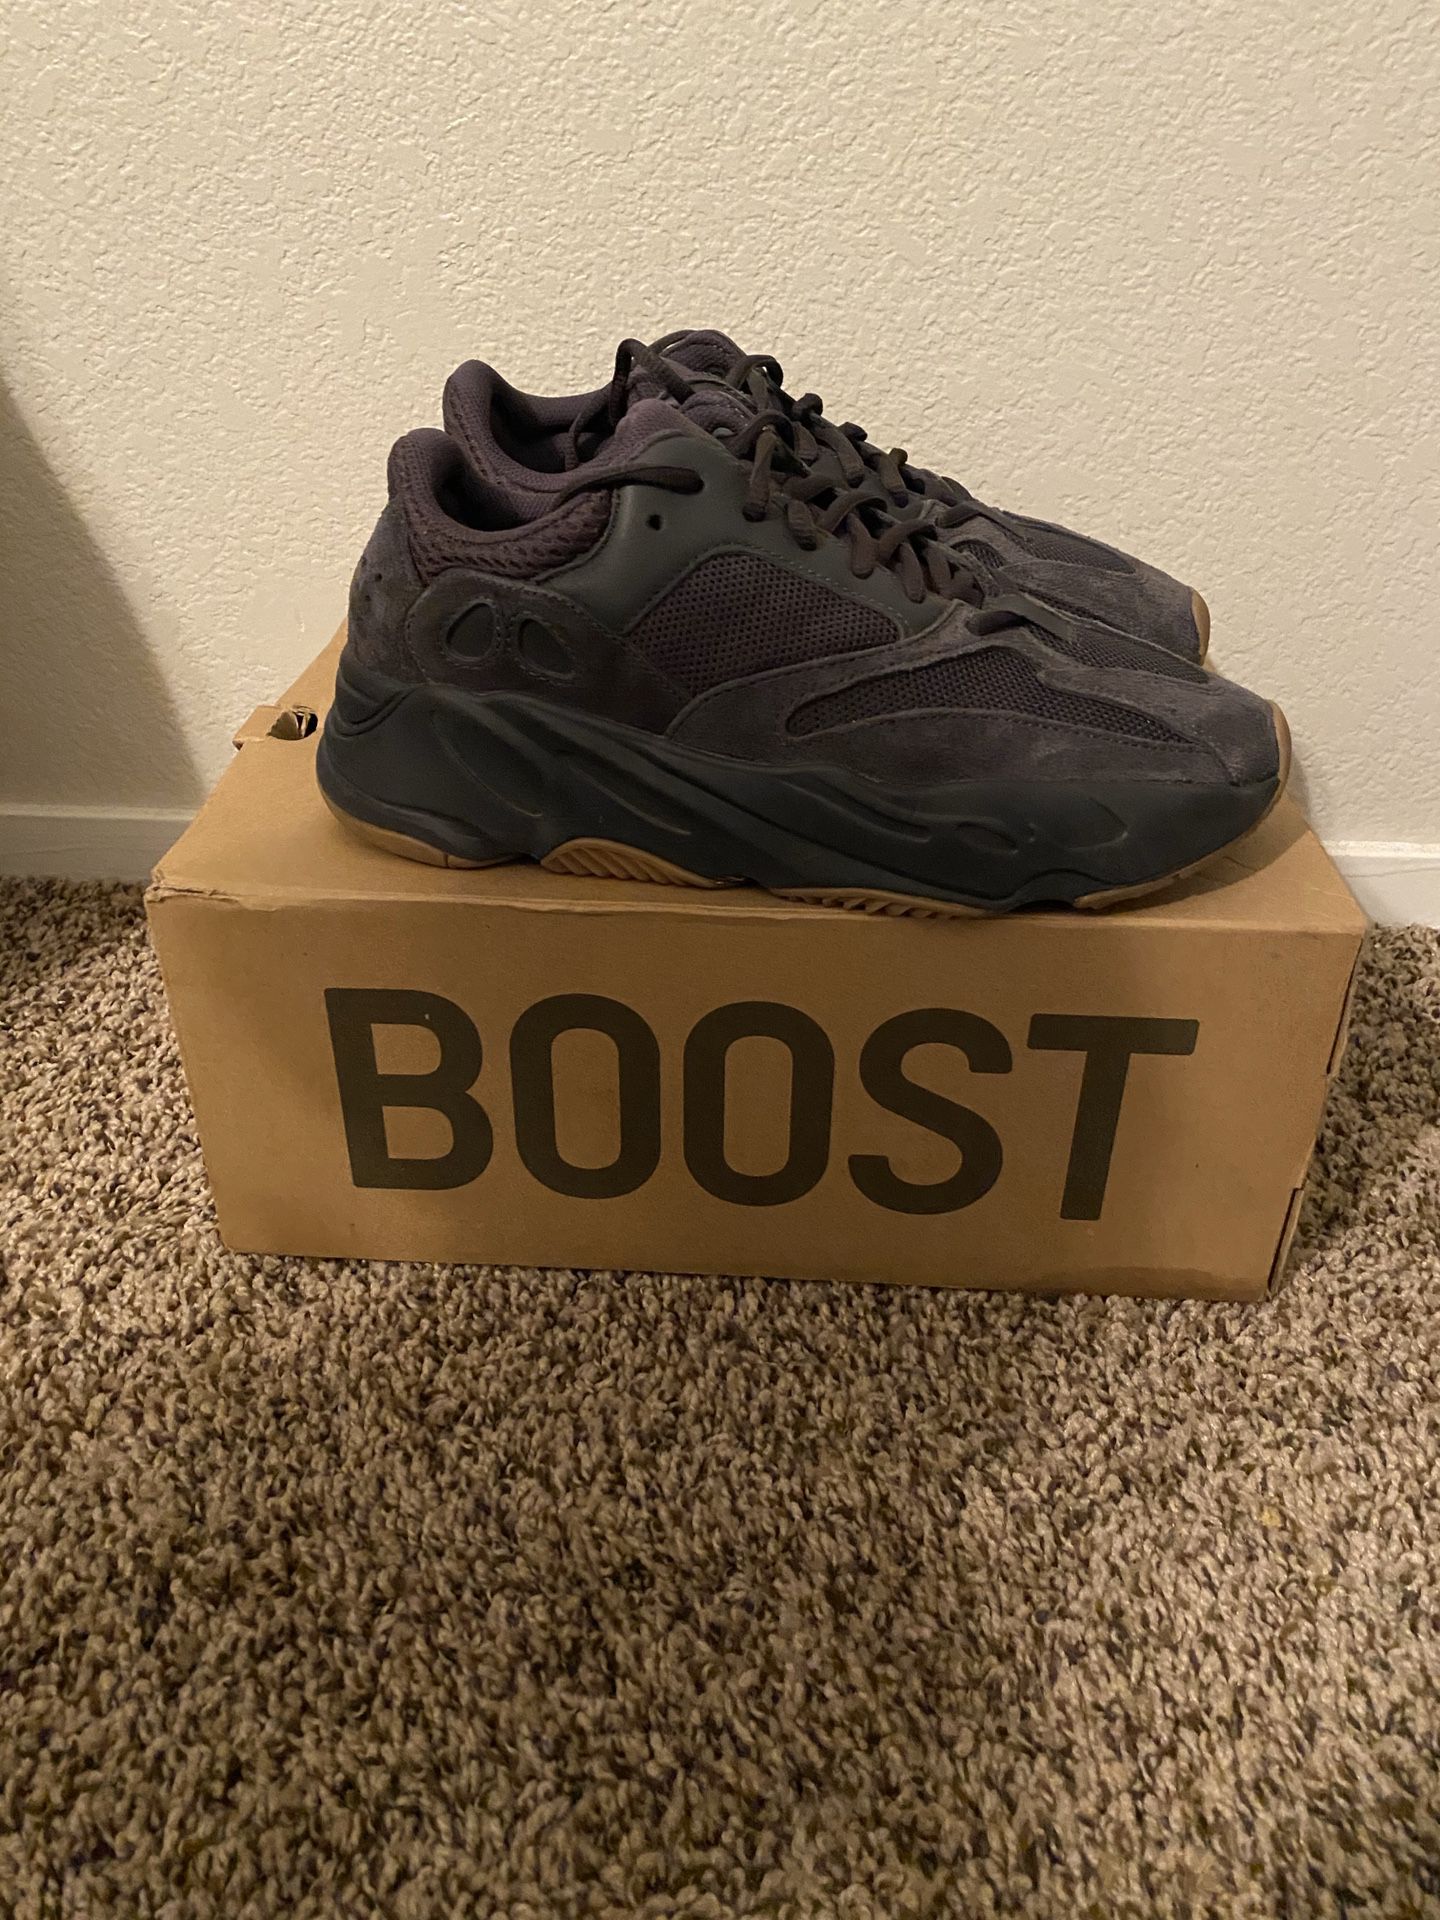 Yeezy 700 vnds size 8.5 410